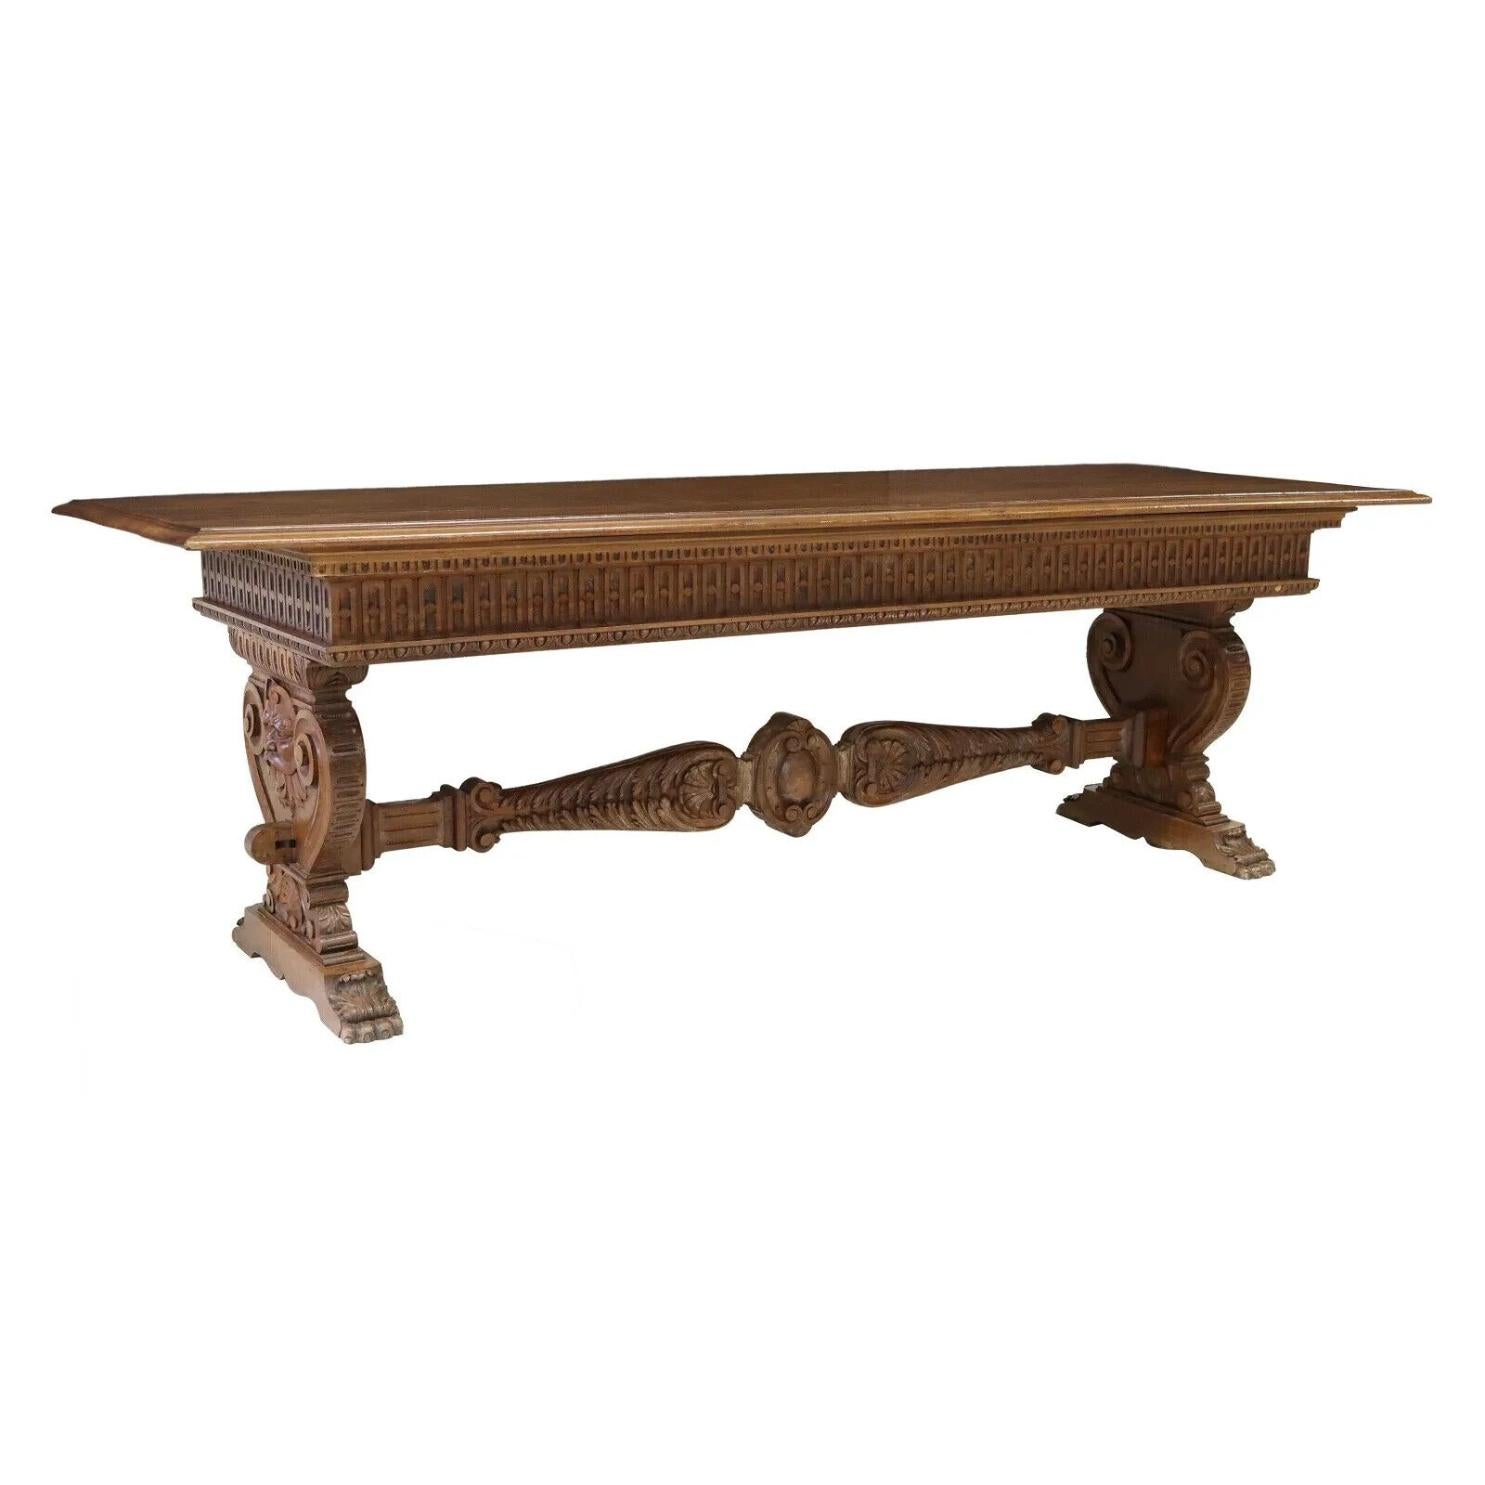 Gorgeous 1800s Antique Monumental Renaissance Revival Walnut, Volute Support Table!!

Italian Renaissance Revival walnut table, 19th c., rectangular top, molded apron, volute supports with carved grotesque masks, cross stretcher with wedged mortise